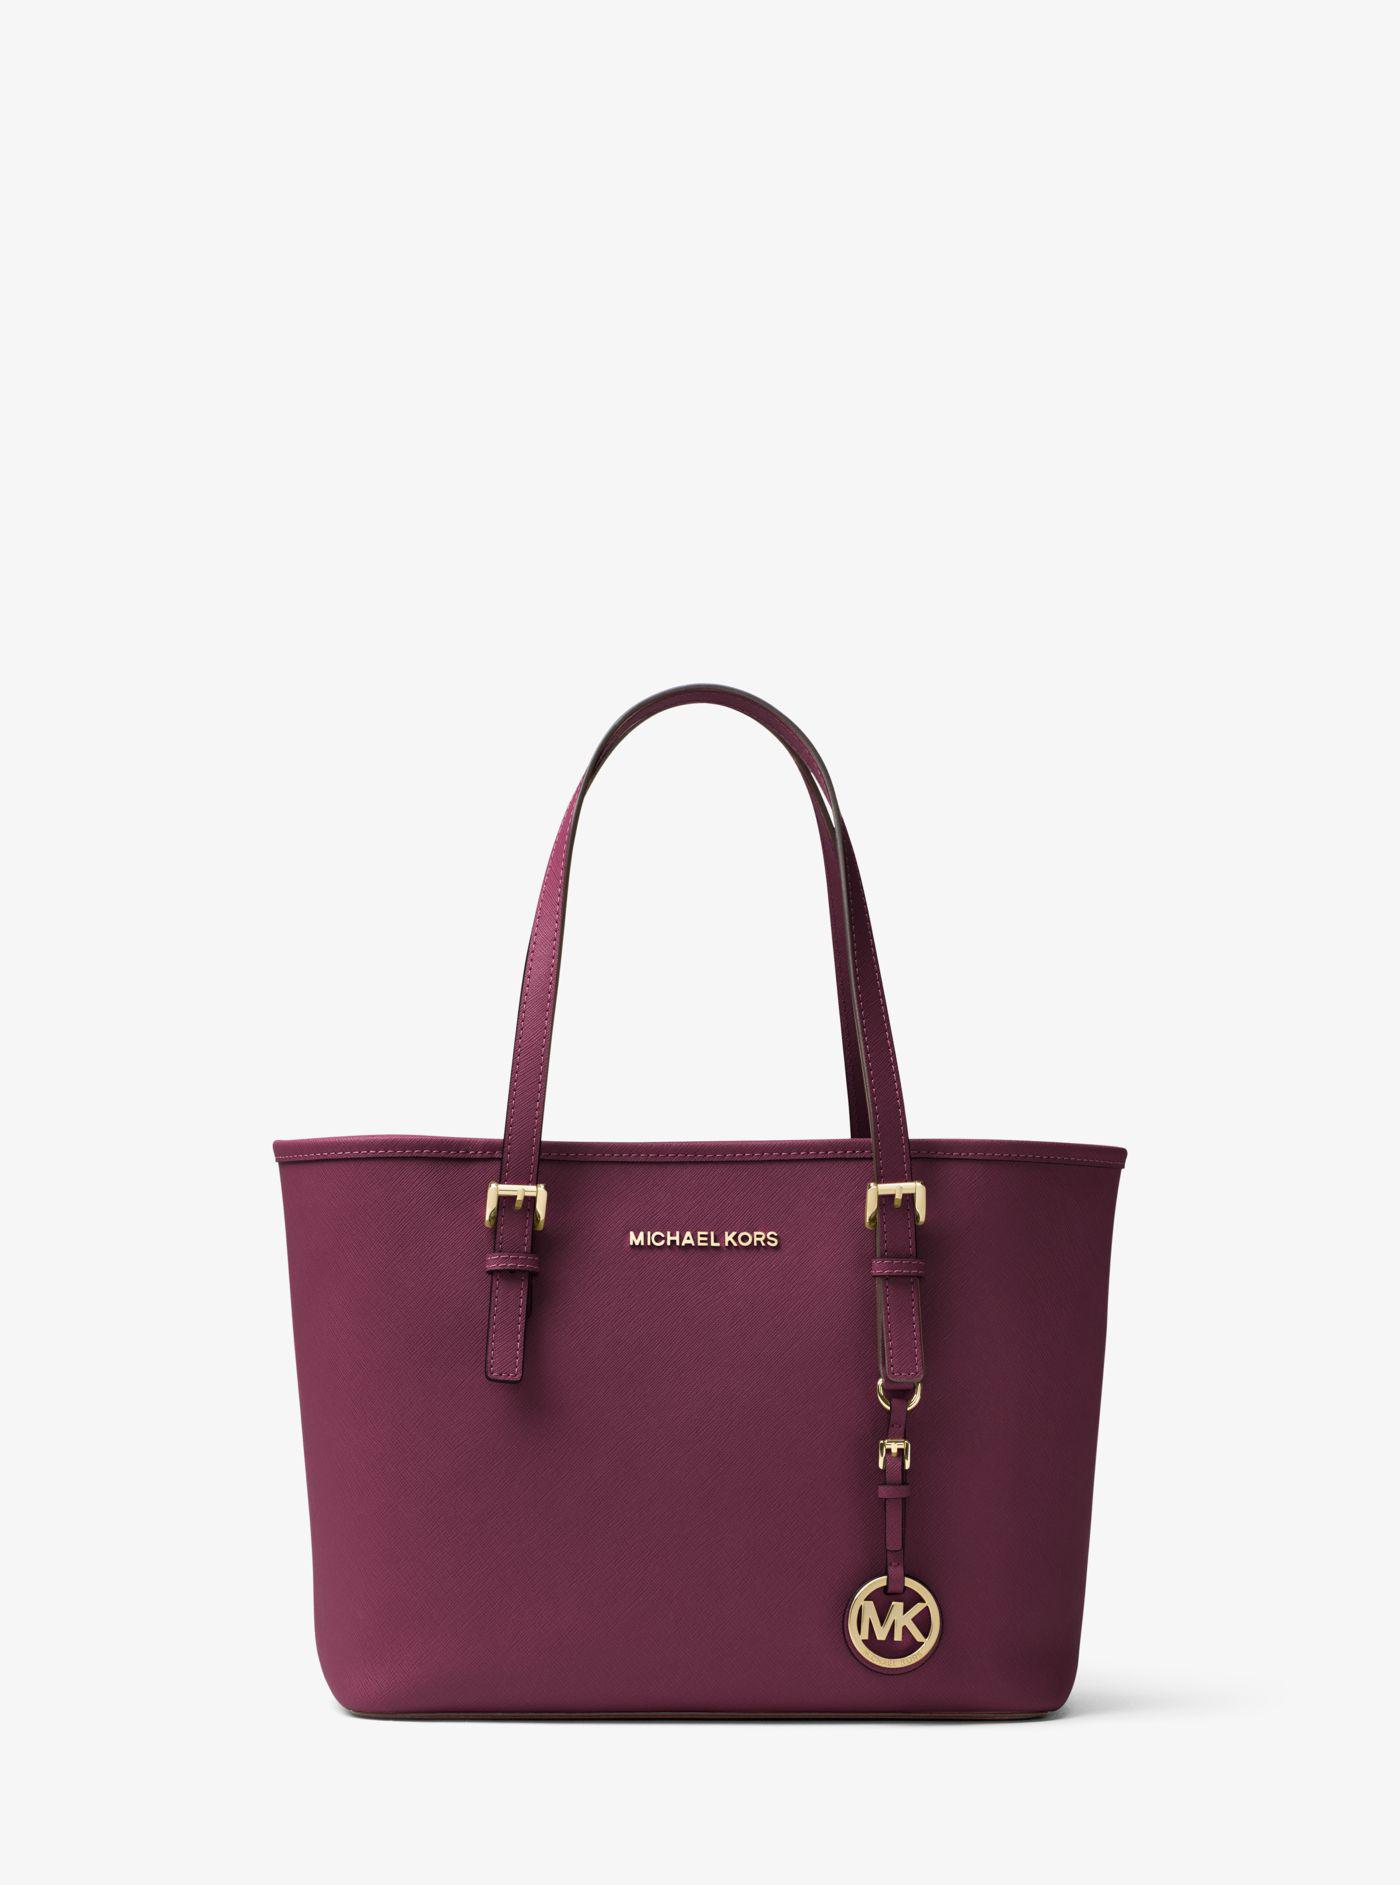 Michael Kors Jet Set Saffiano Leather Small Tote Bag in Purple | Lyst